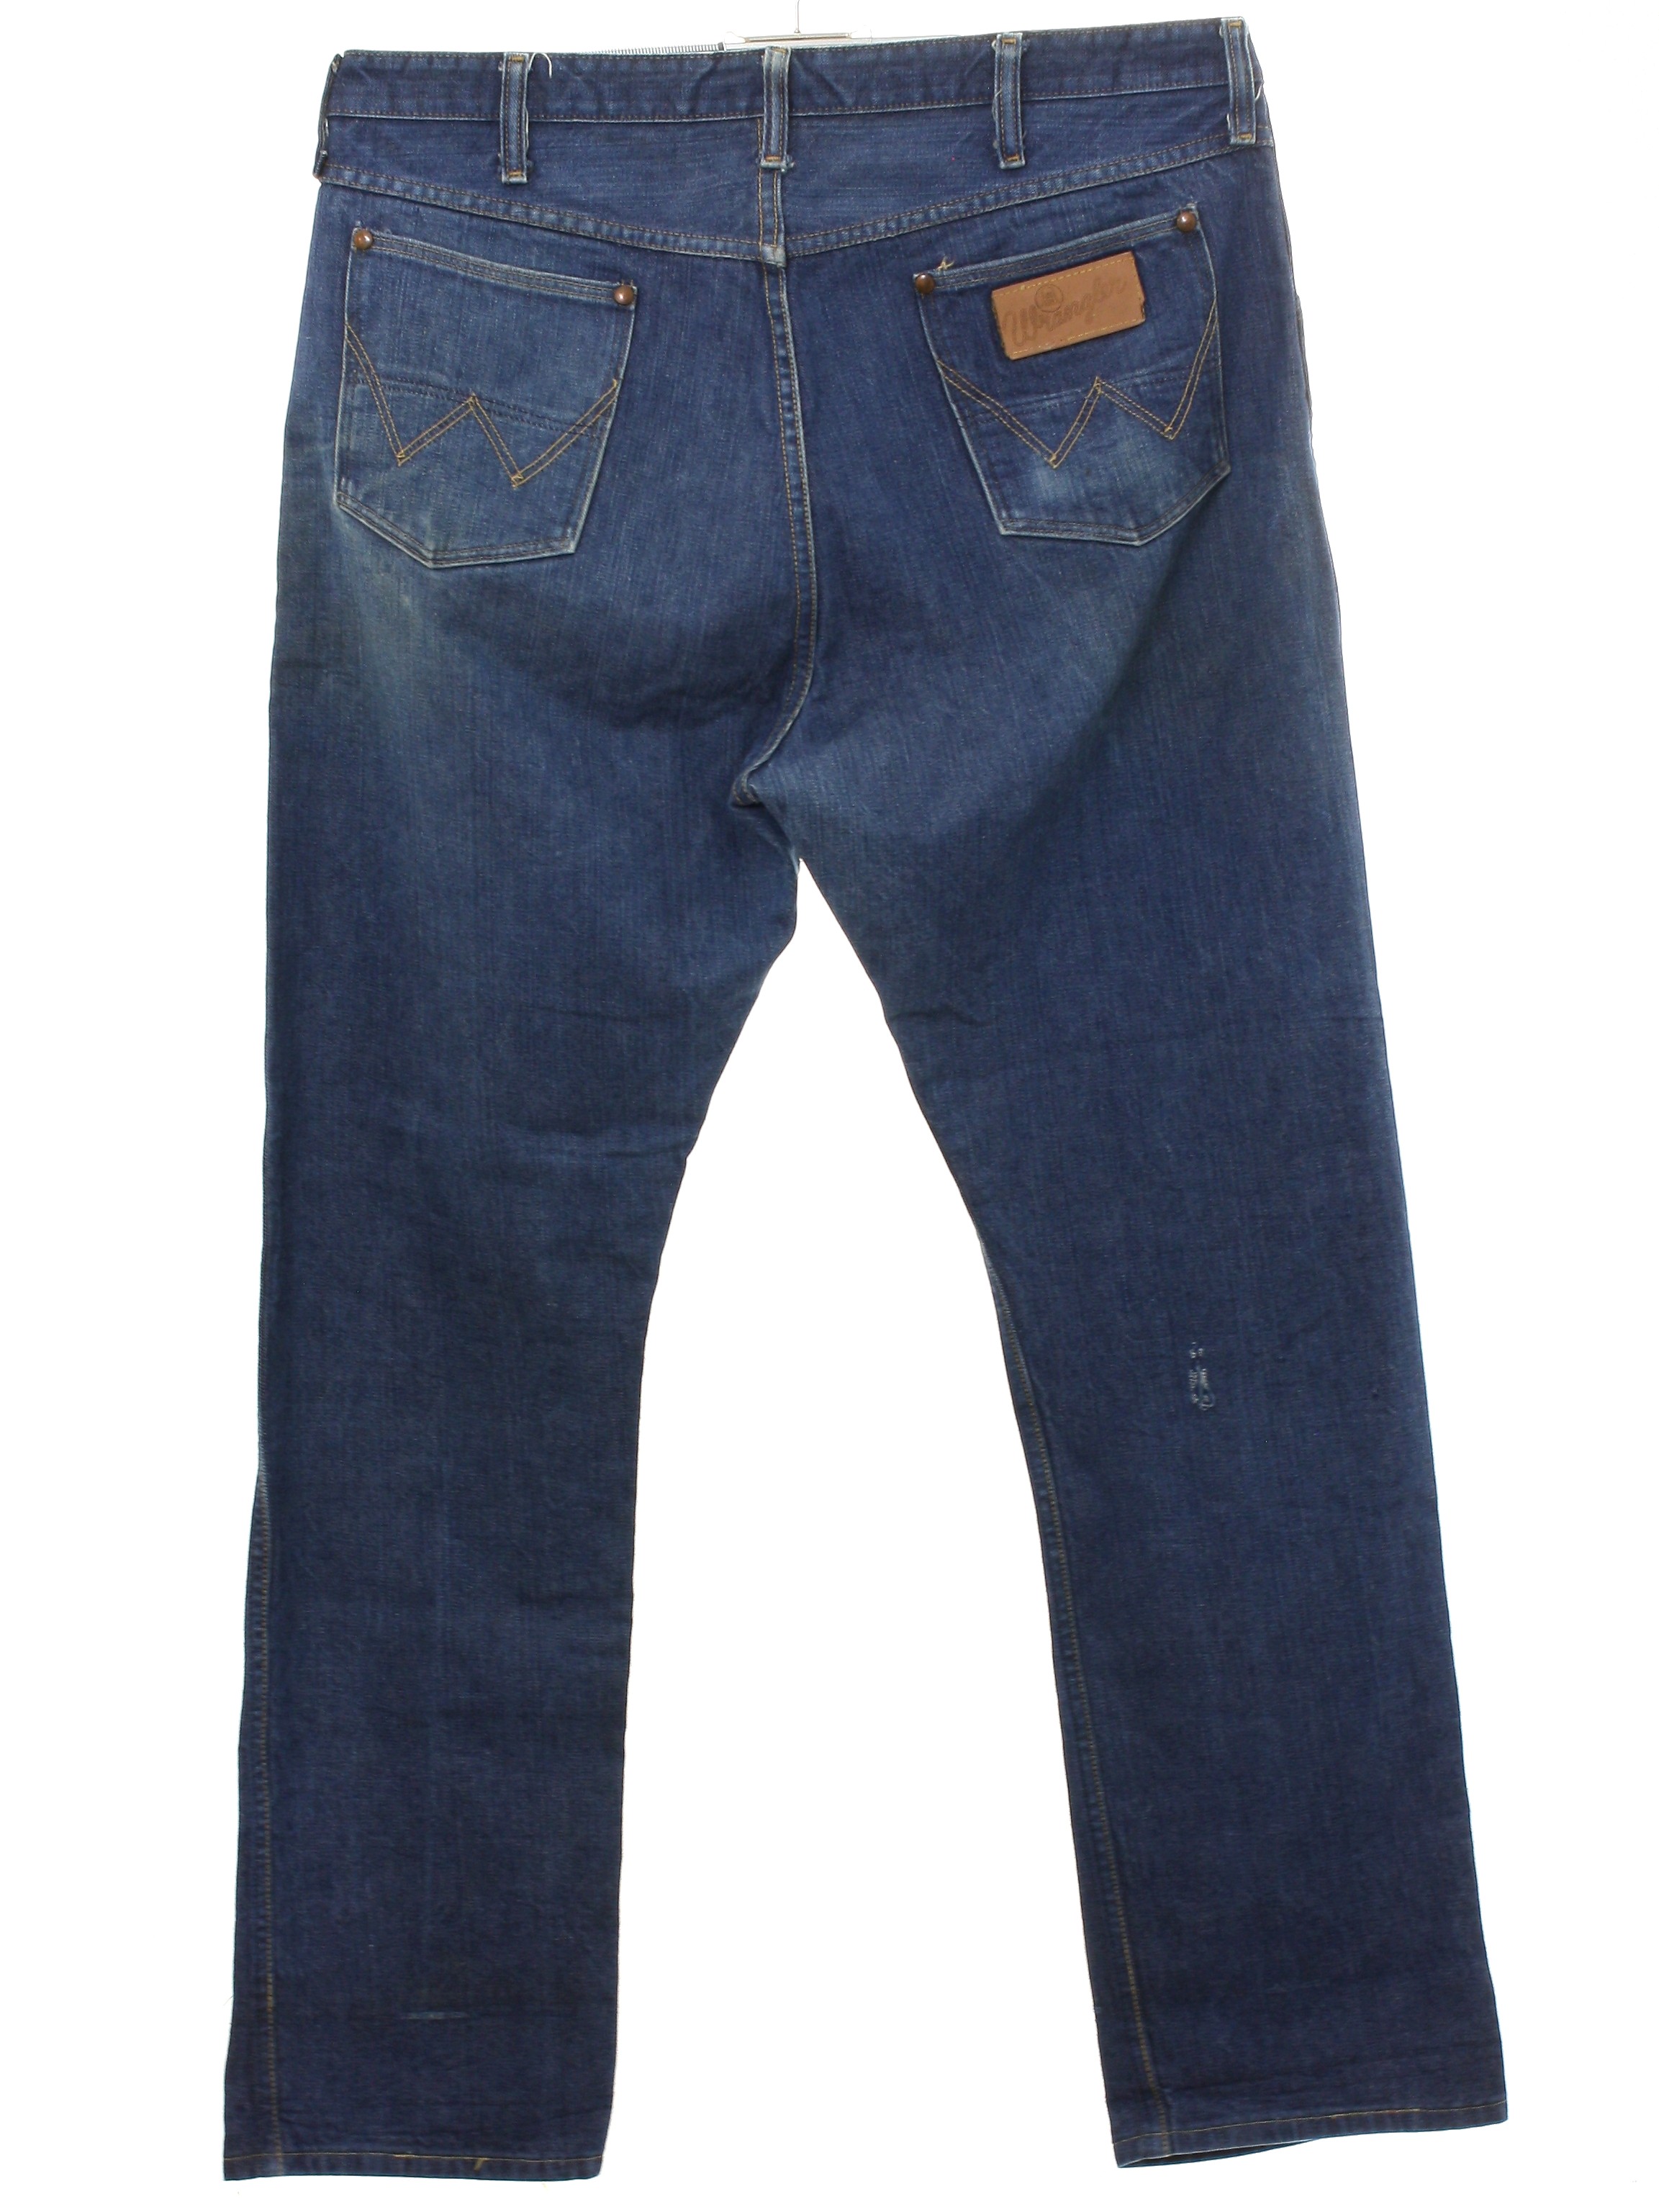 Vintage 1960's Pants: 60s -Wrangler Blue Bell- Mens faded ndigo blue cotton denim  jeans with flat front, zipper fly, straight legs, plain cuffless hems,  inset front pockets with corner rivets, back pockets